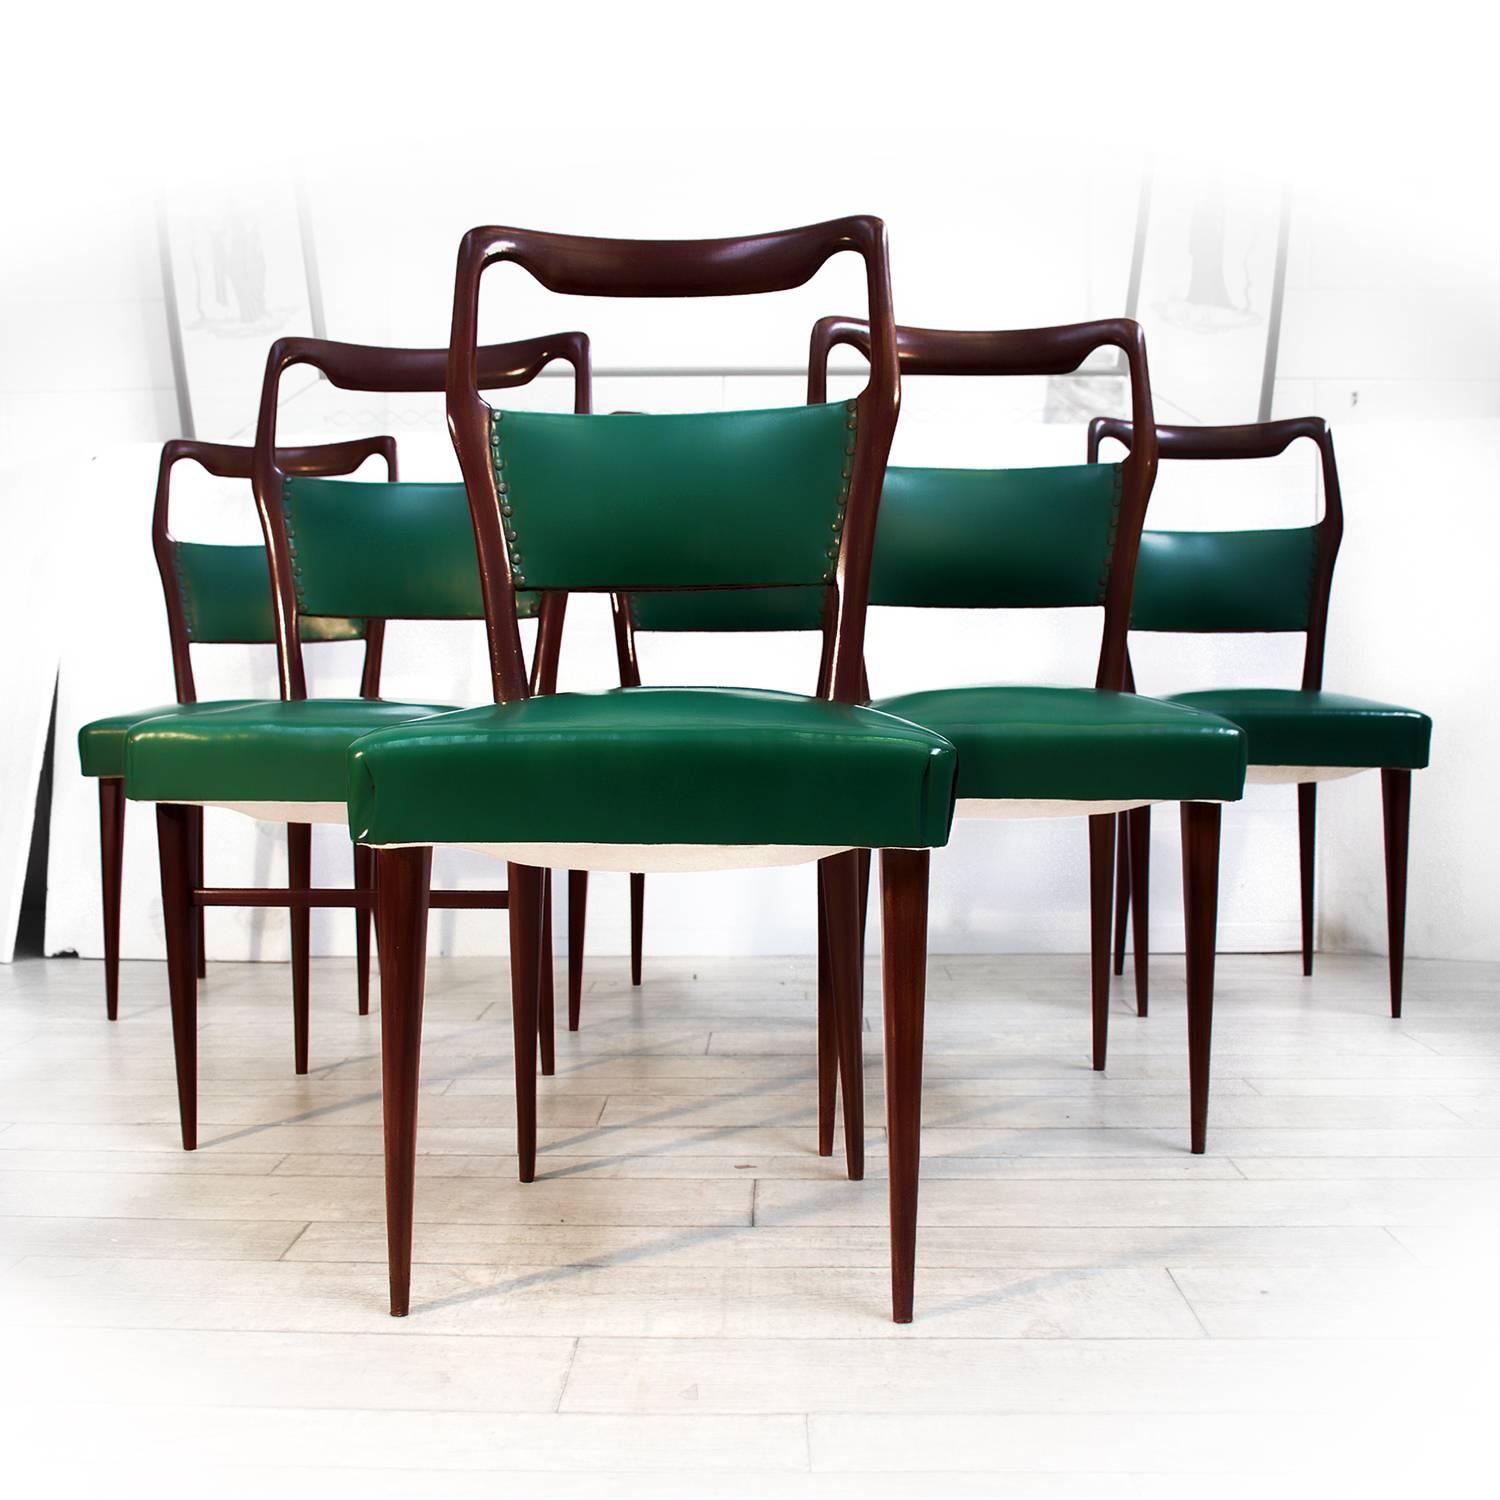 Elegant lines and solid mahogany structures for this set of six dining chairs designed by Vittorio Dassi in the 1950s.
The wood surfaces, as well the upholstery green leatherette, springs and padding are in good conditions of the period, with minor